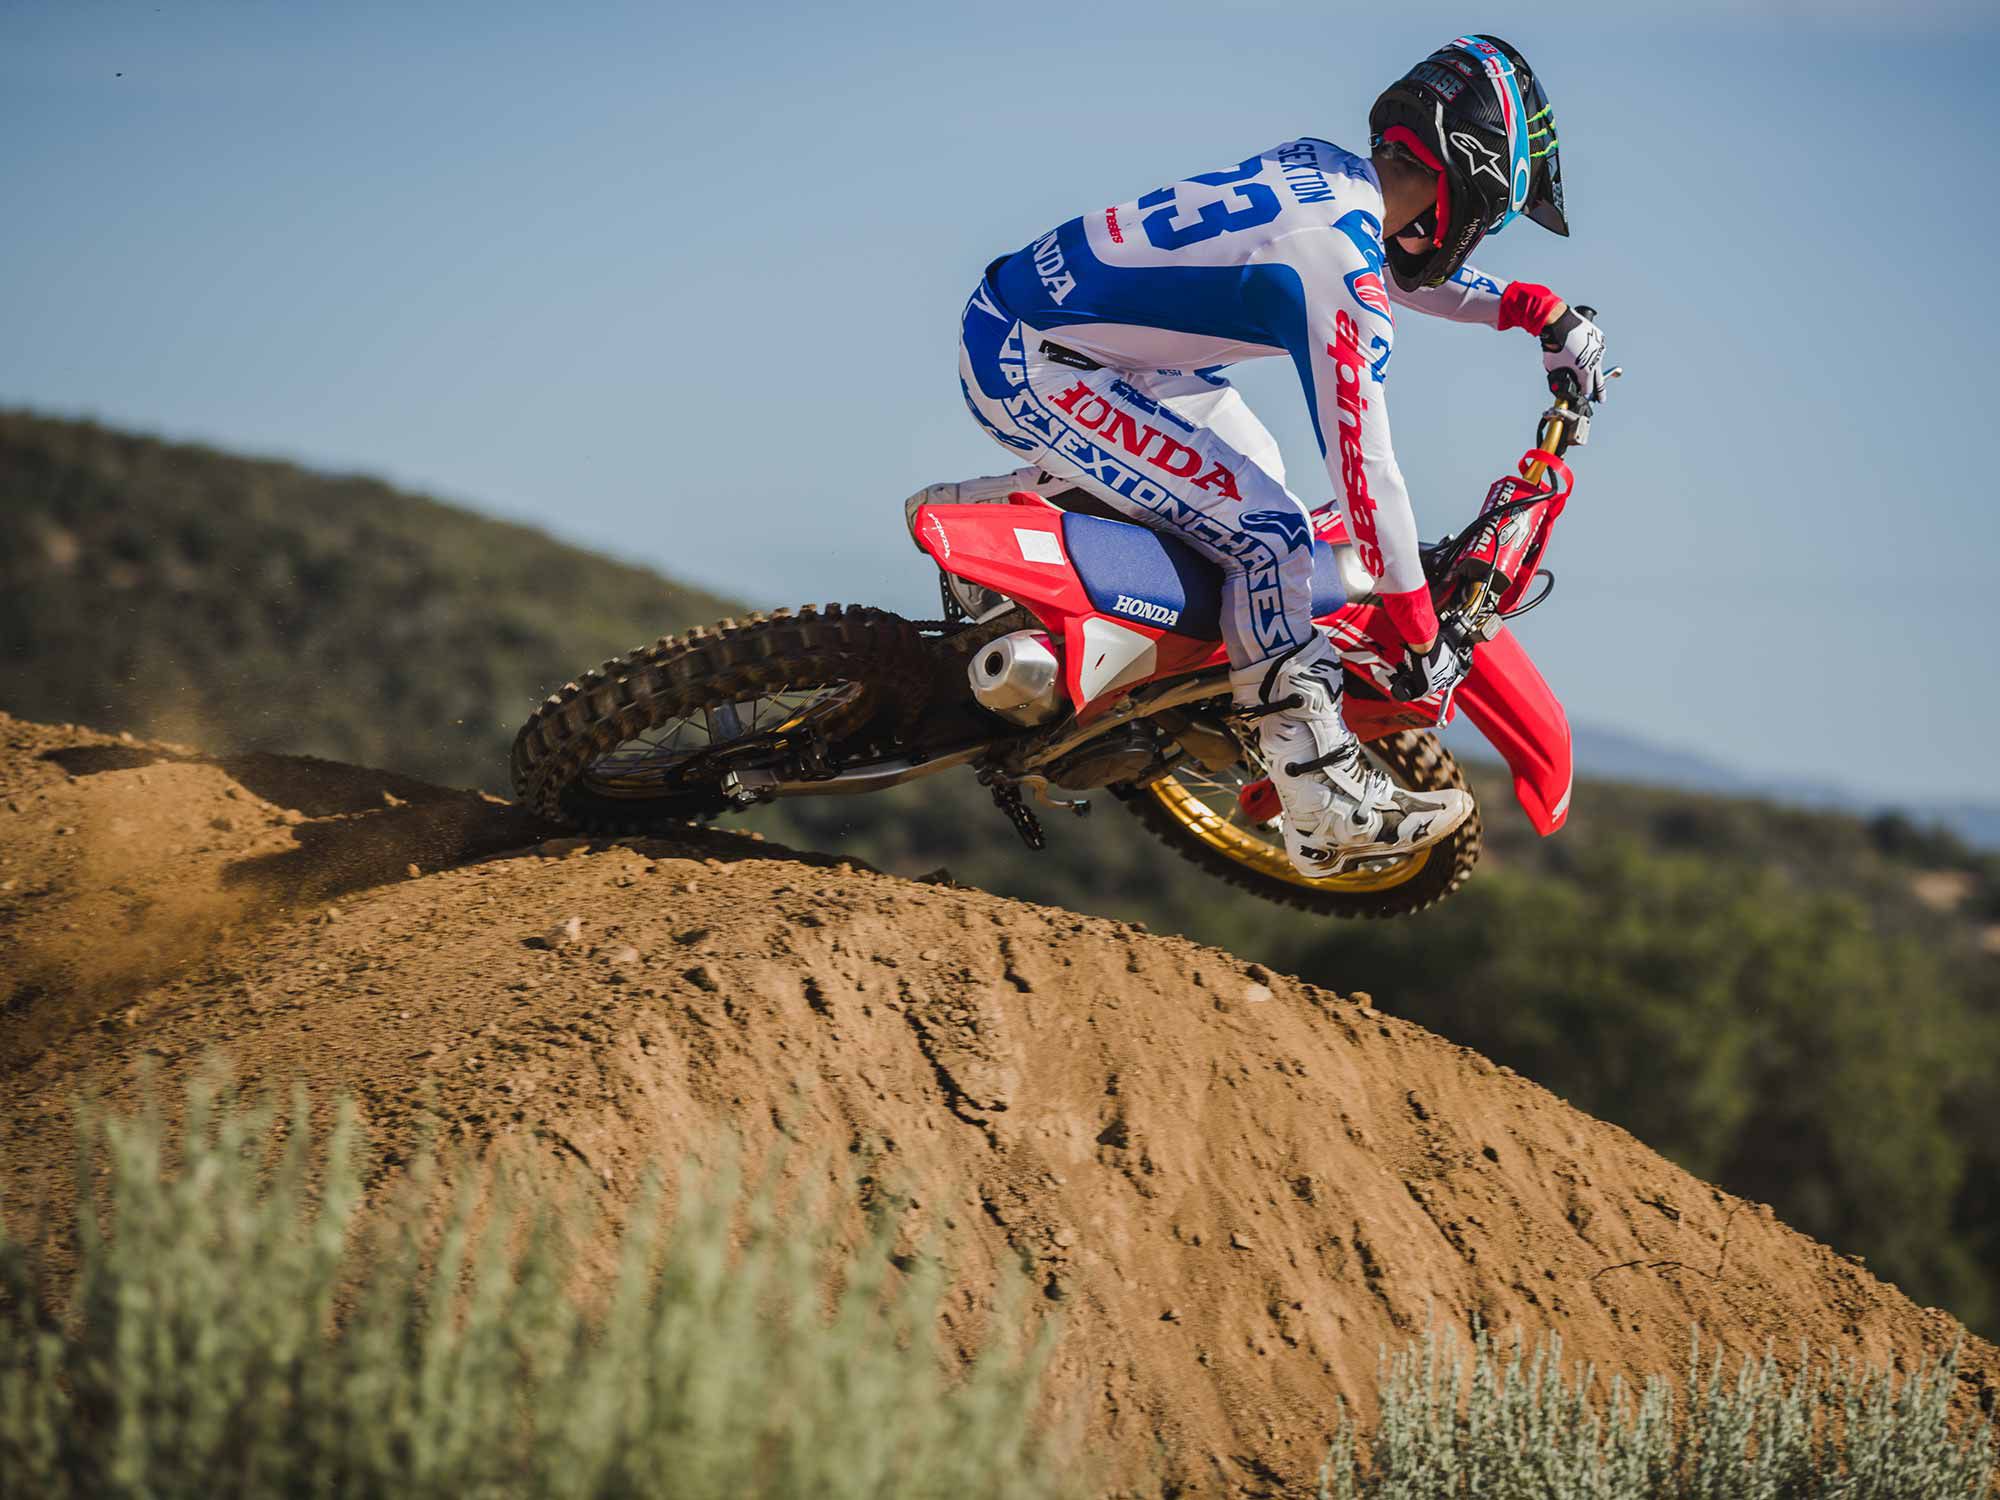 Honda’s 2023 CRF450R 50th Anniversary Edition will be available starting this September.